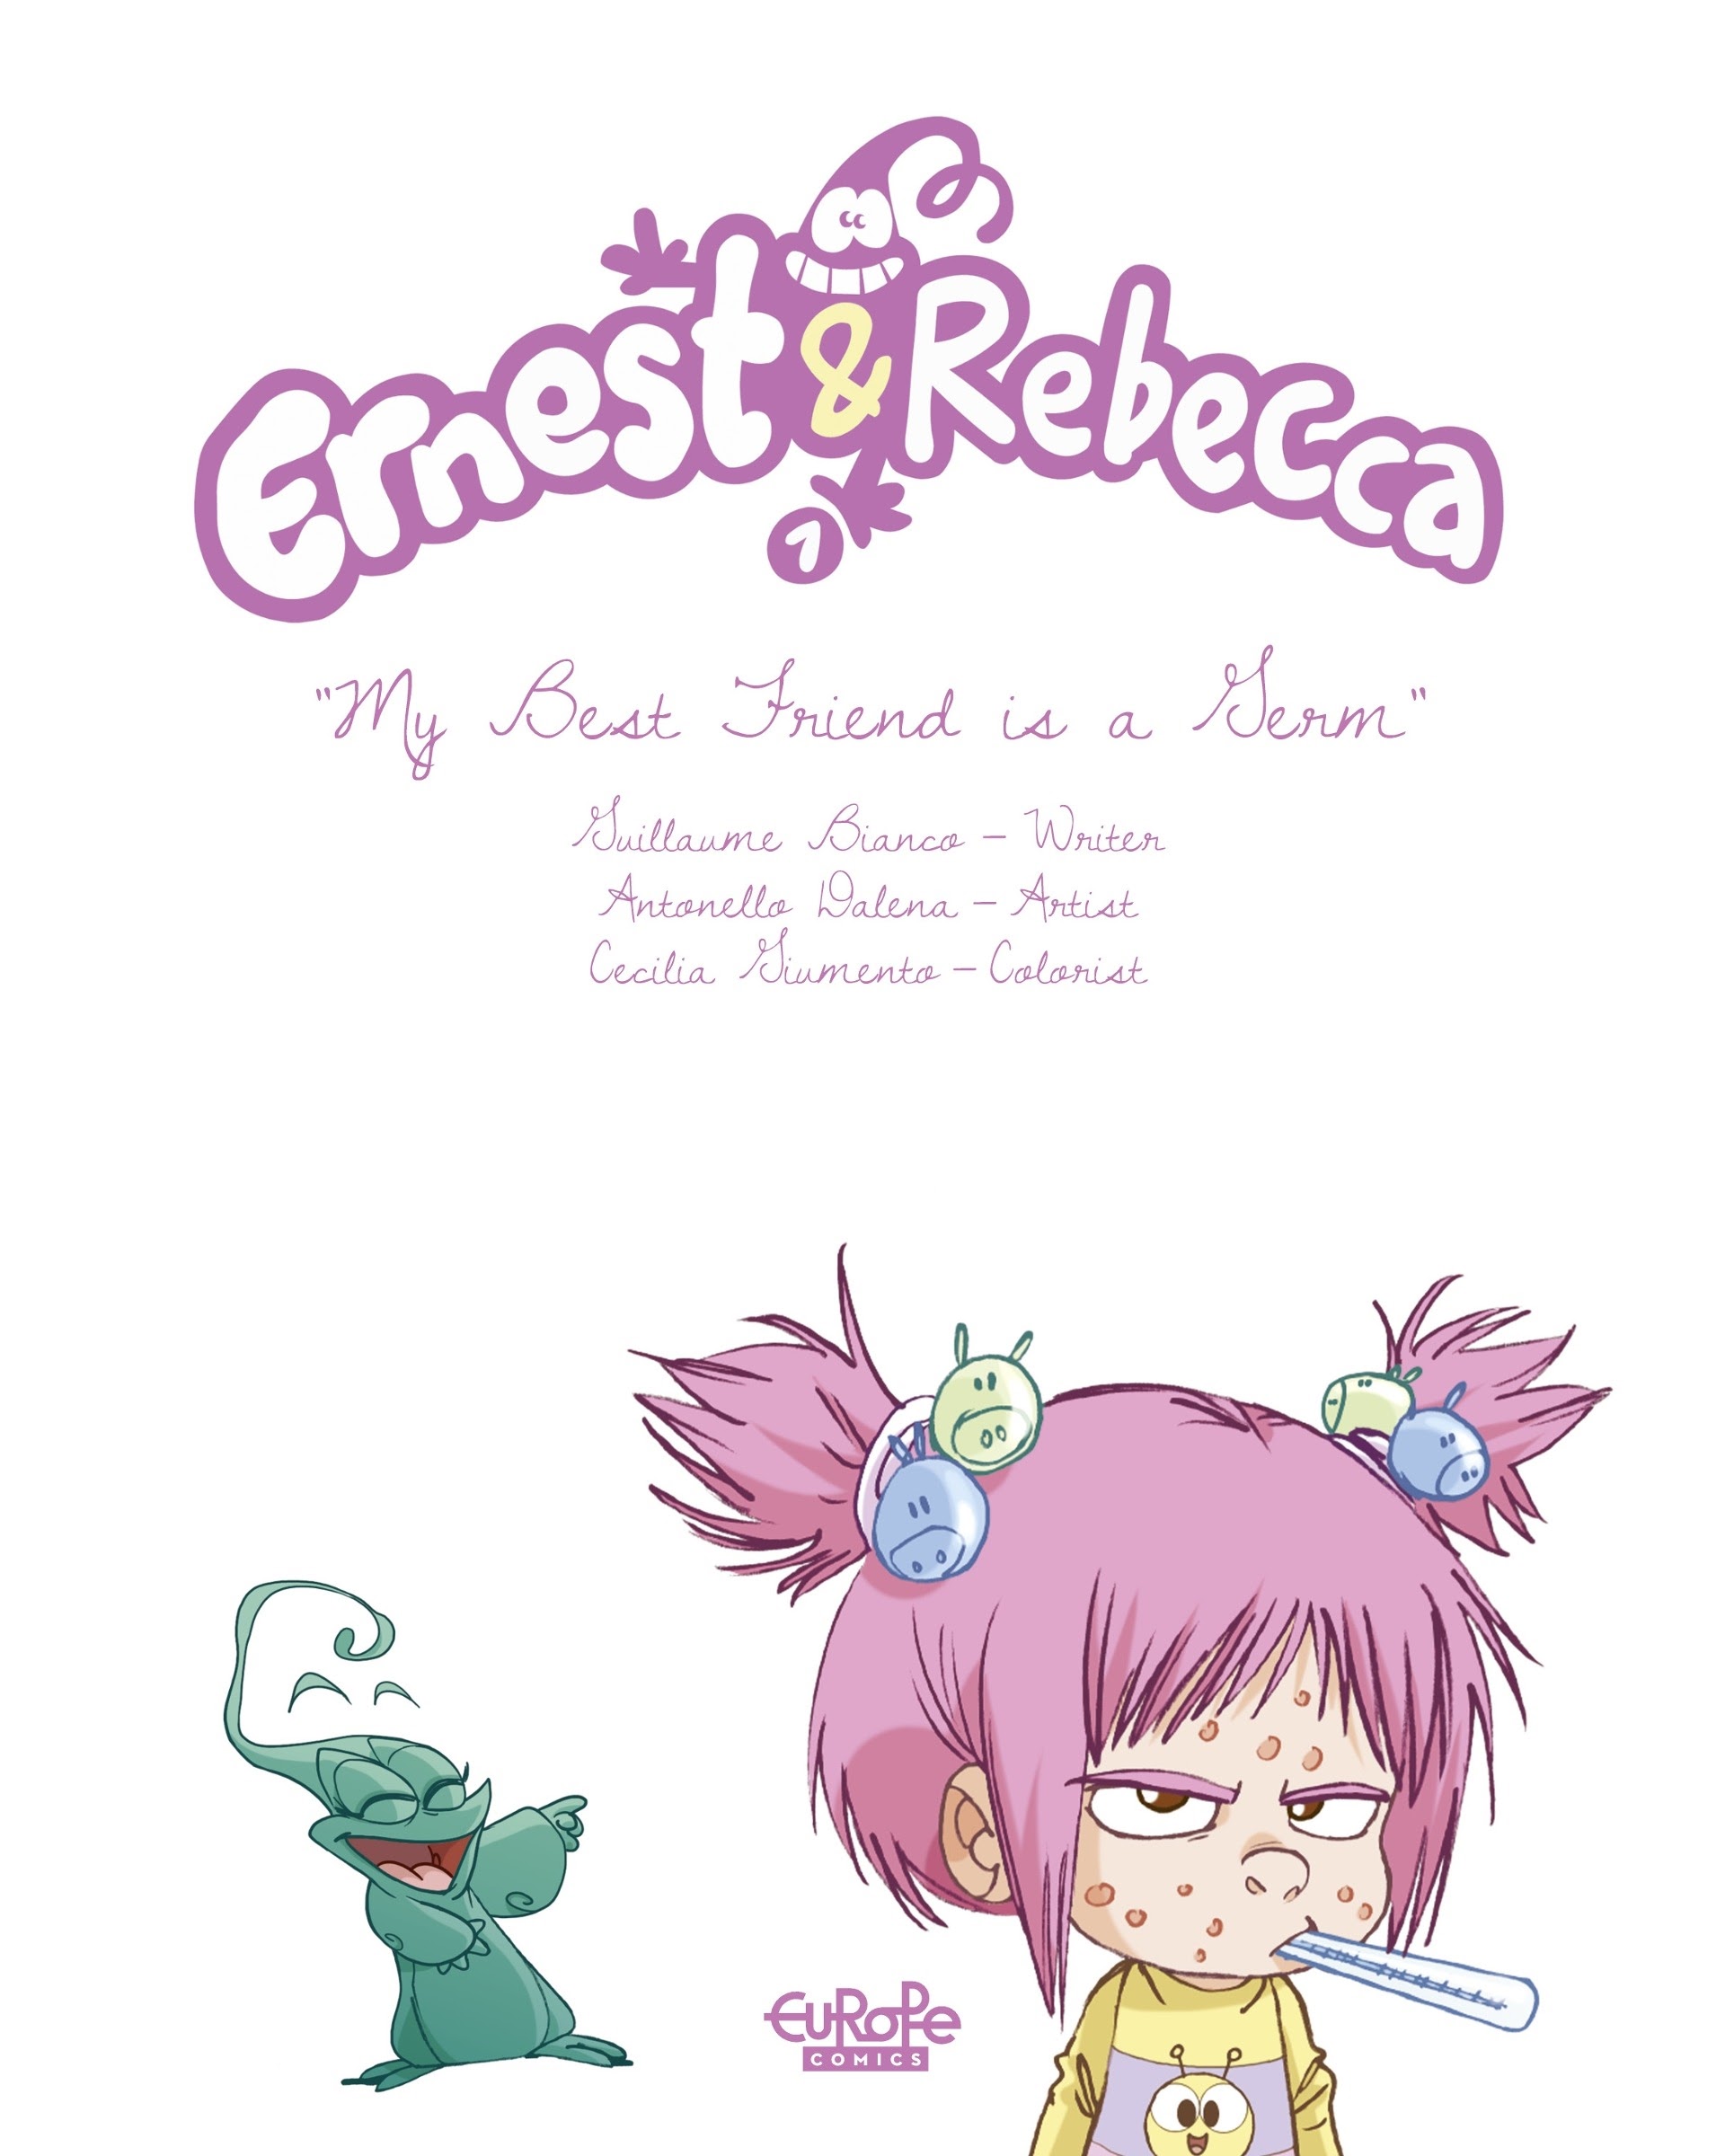 Read online Ernest & Rebecca comic -  Issue #1 - 3